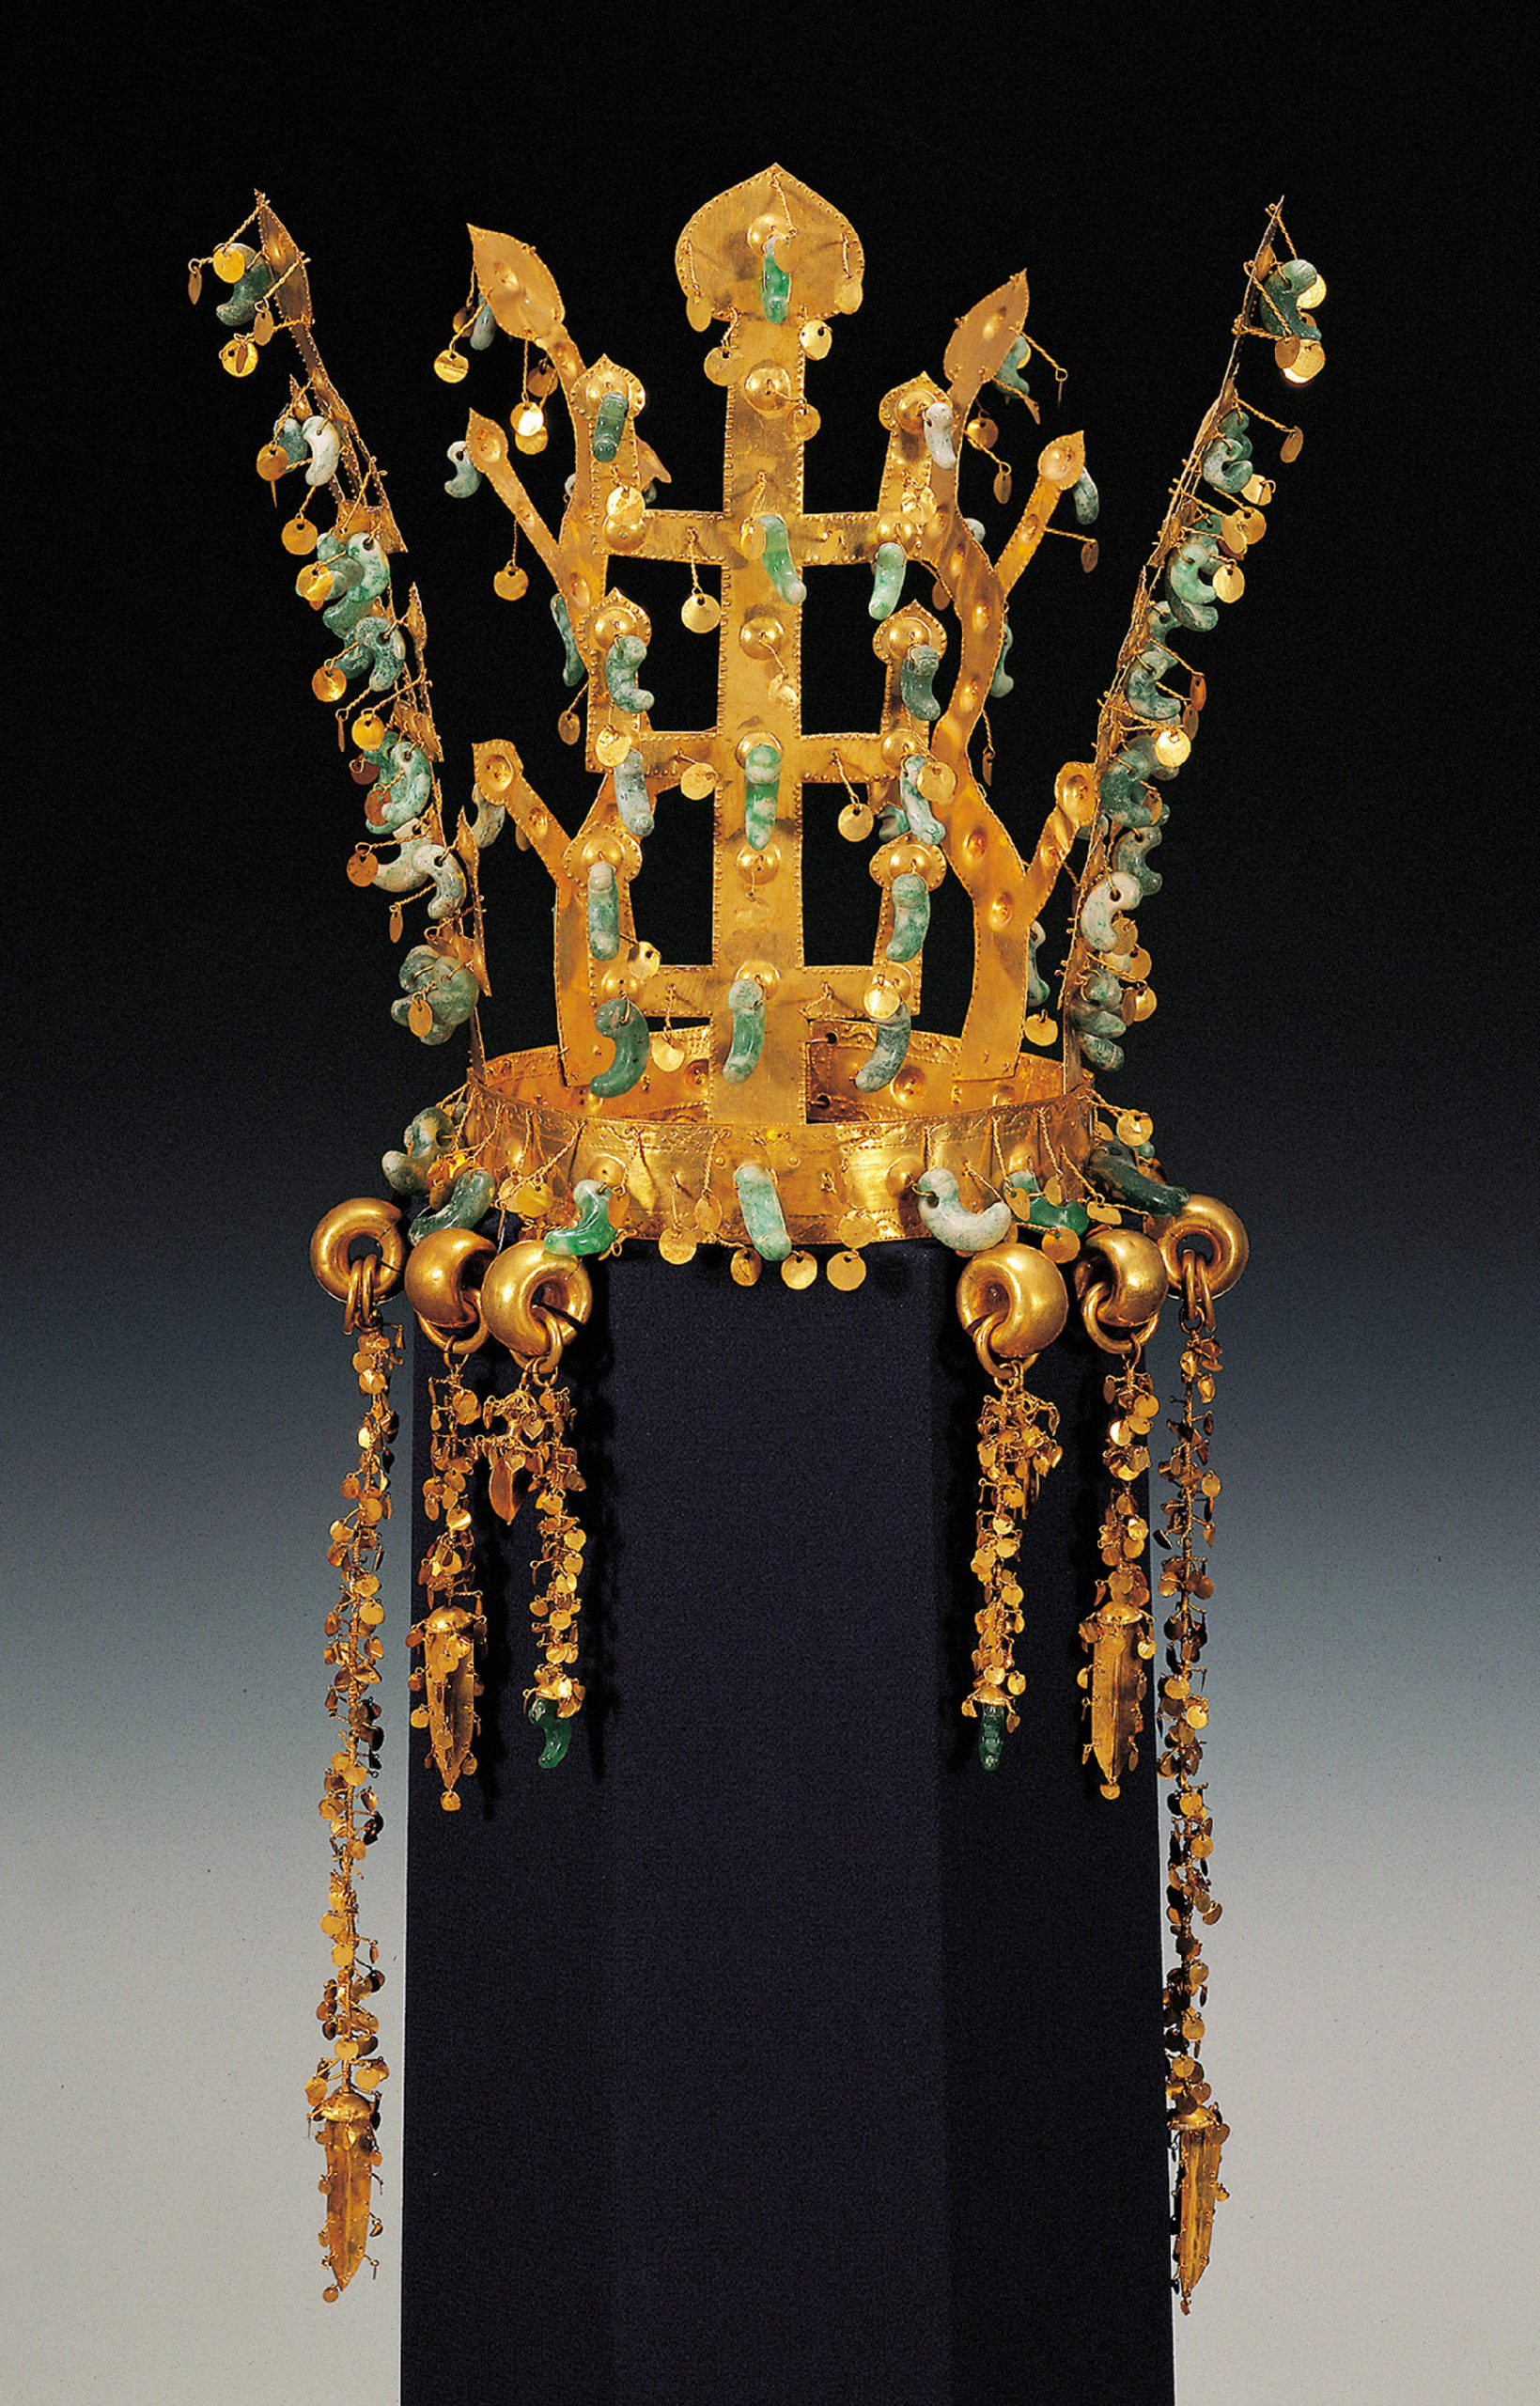 <p>Gold and jade crown</p>